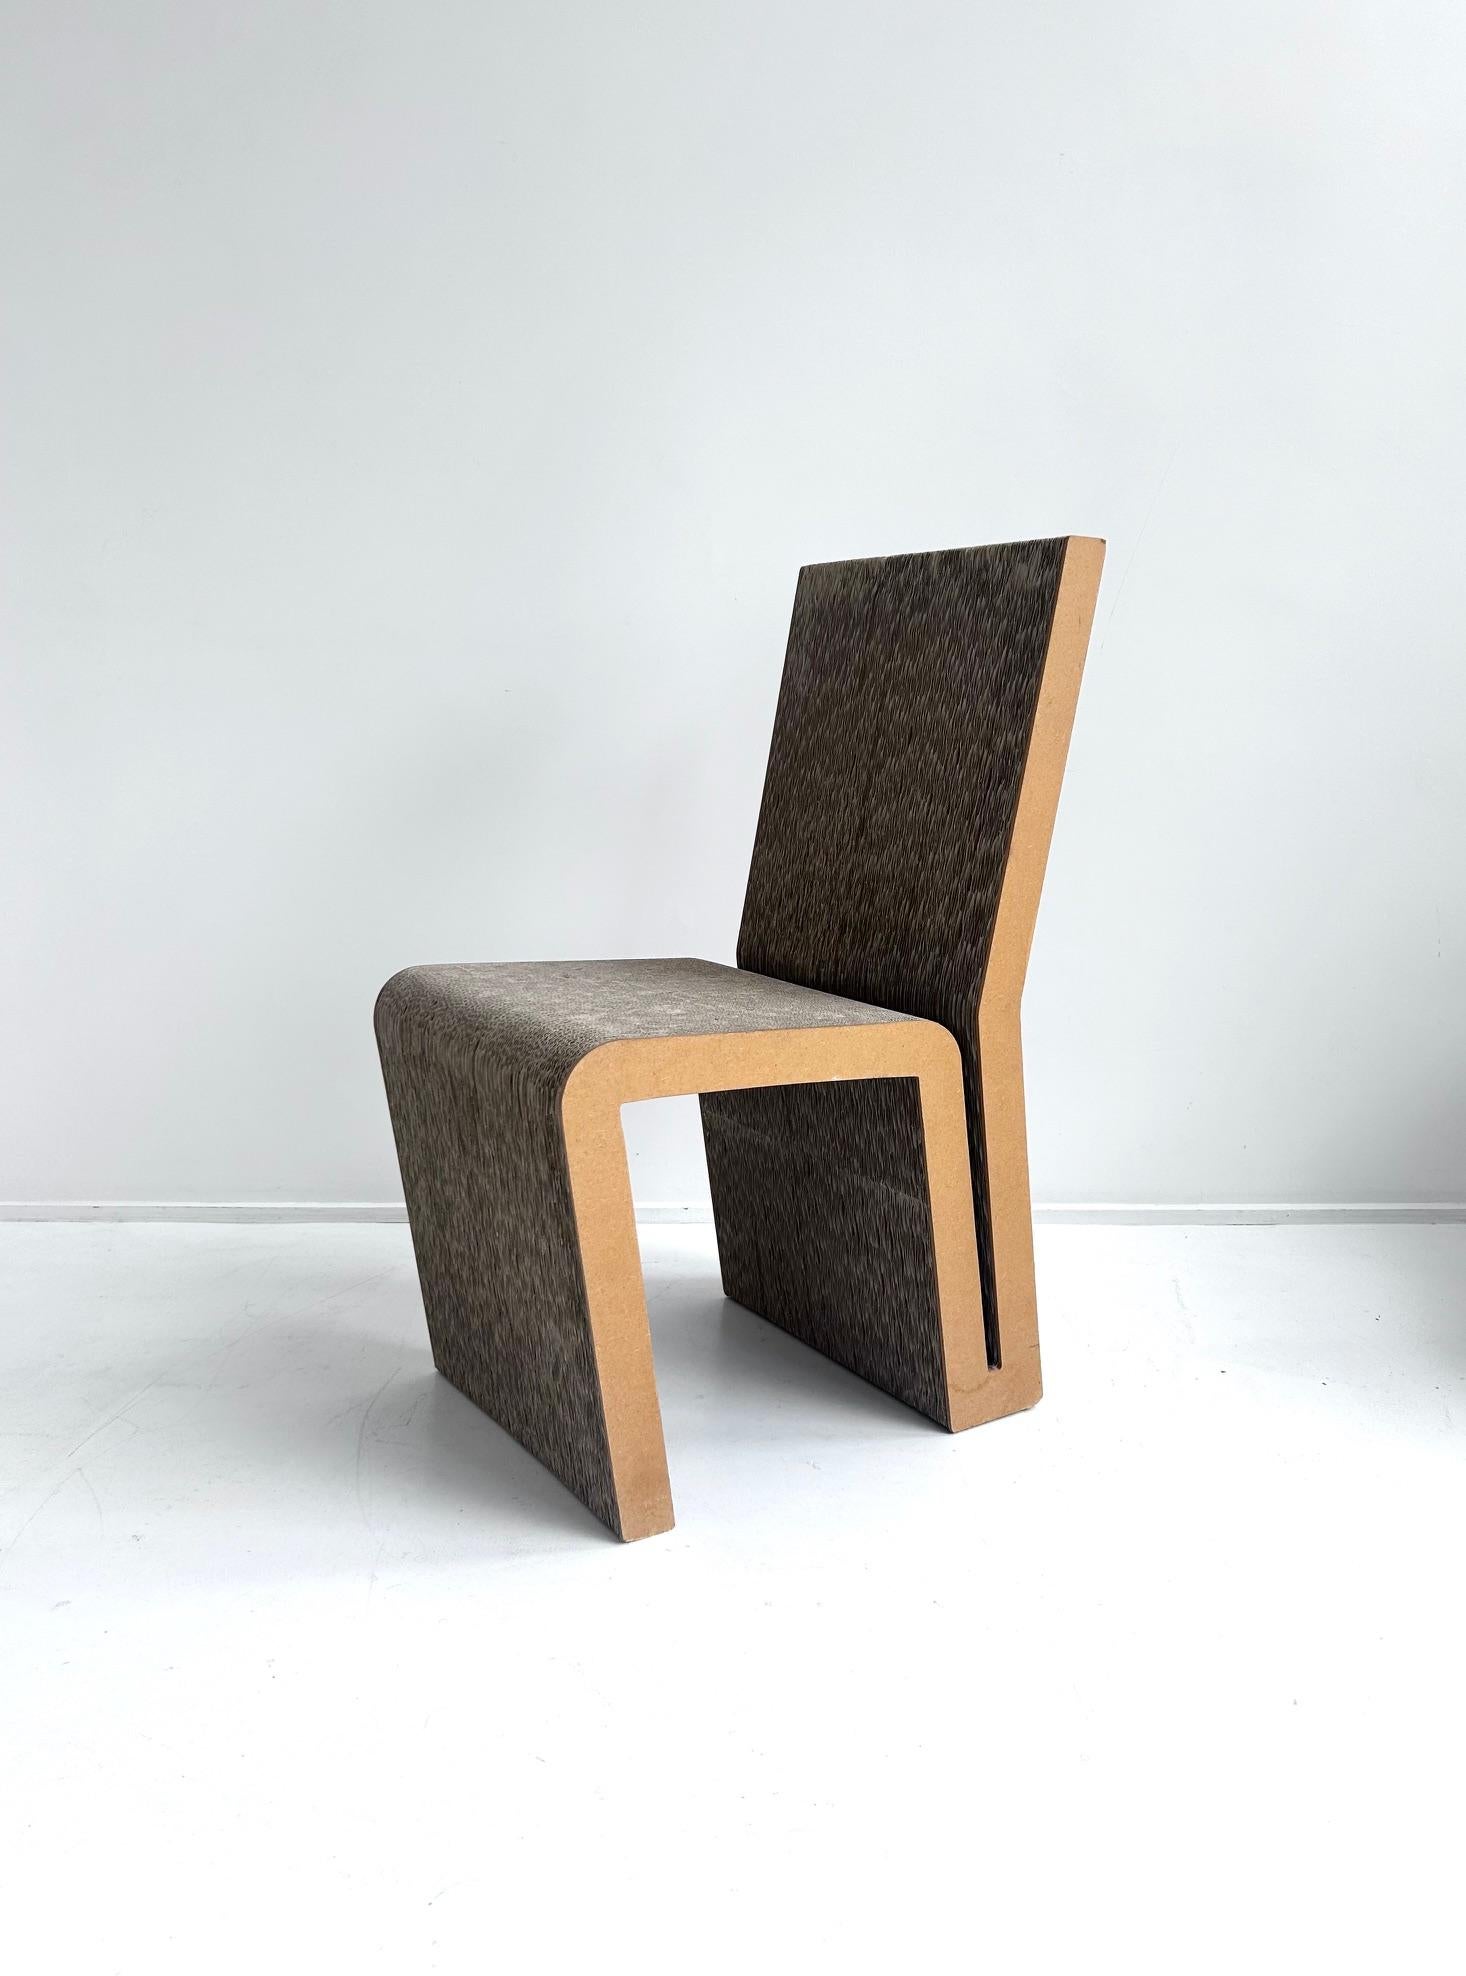 German Easy Edges chair by Franck Gehry, Vitra, 1972